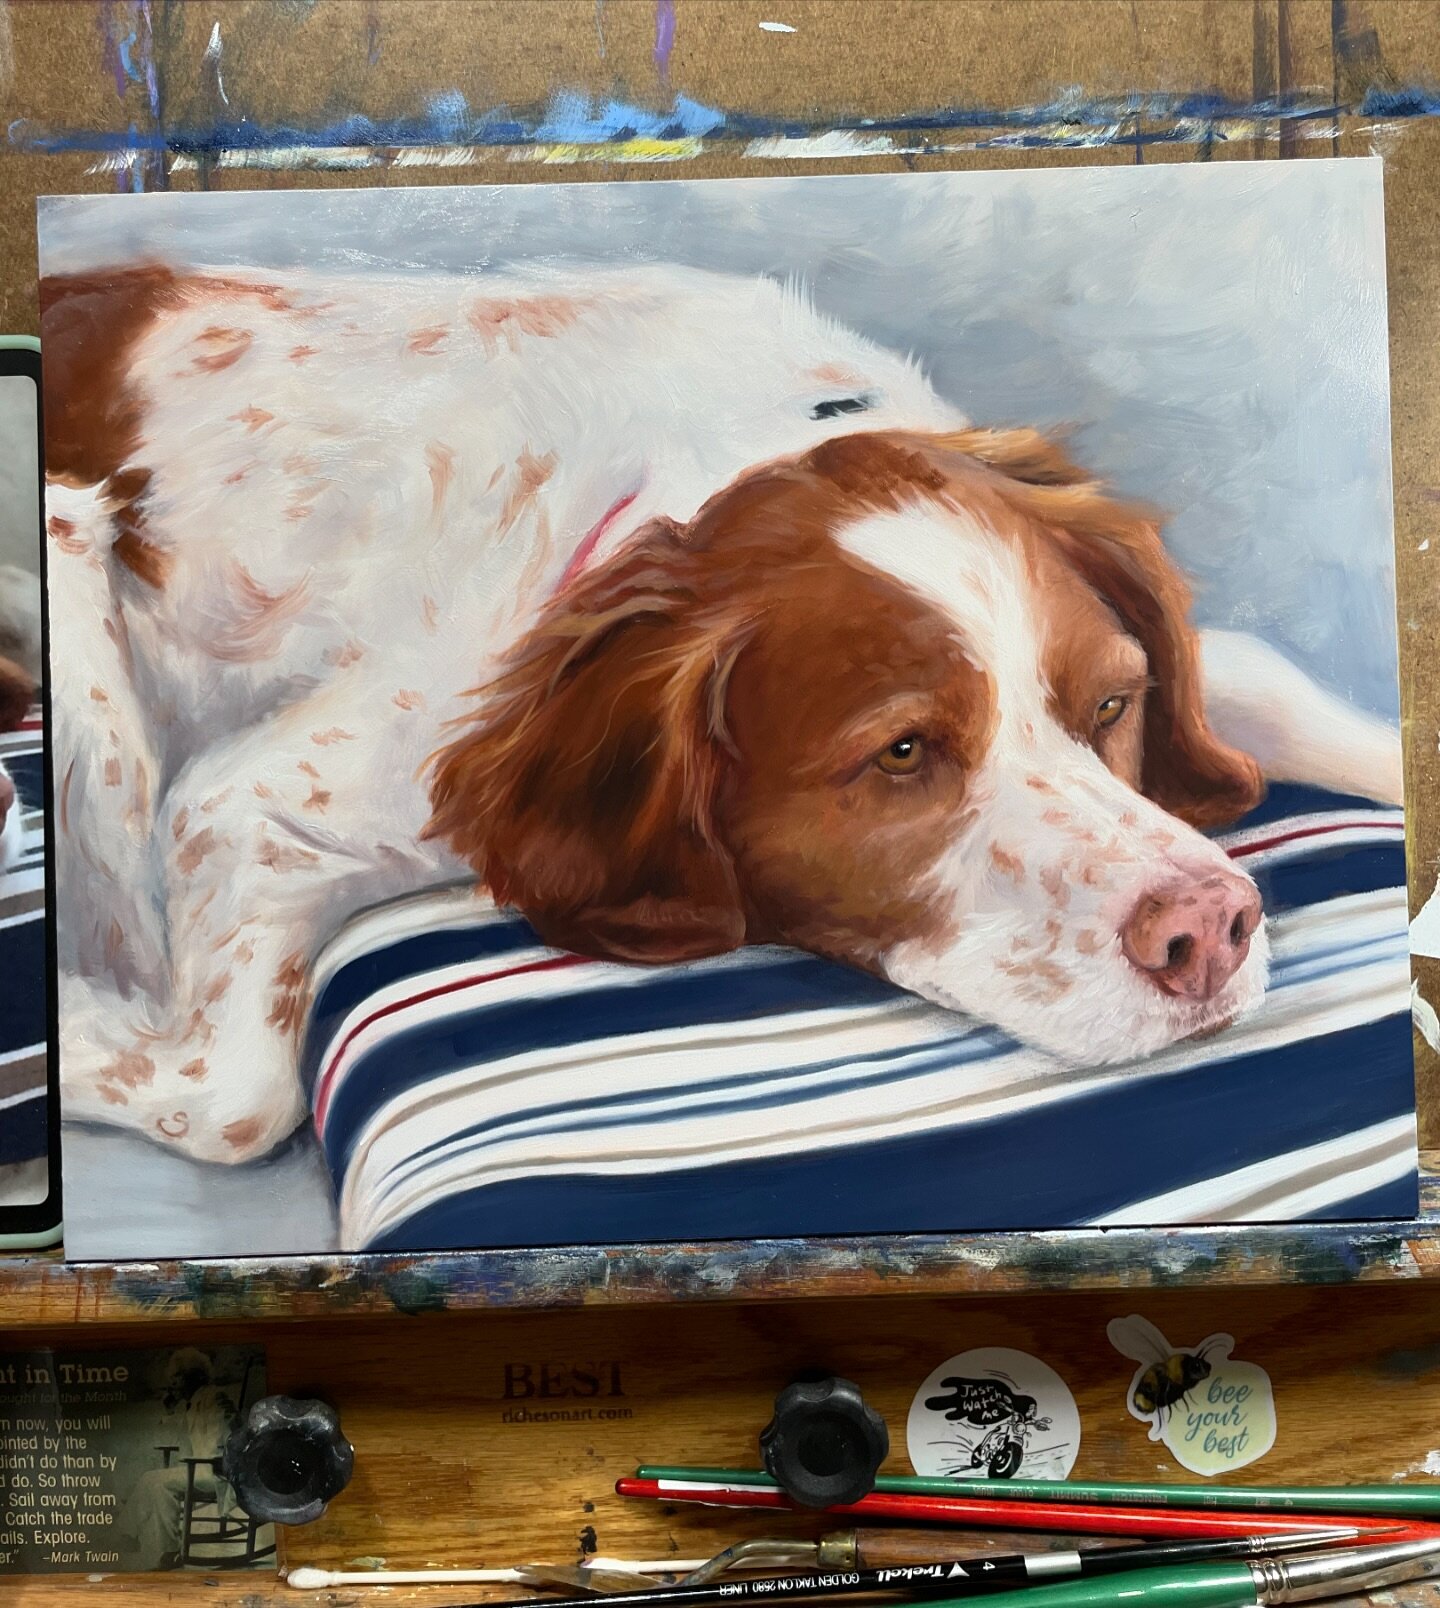 This is Tara. Isn&rsquo;t she a cutie??
I want to boop her nose.  I wish I could meet all the dogs I paint. ❤️🐾
.
This one is 11x14&rdquo; on cradled board. 
.
.
.
.
.
#dogportrait #portraitpainting #oilpaint #dogsofinsta #doglover